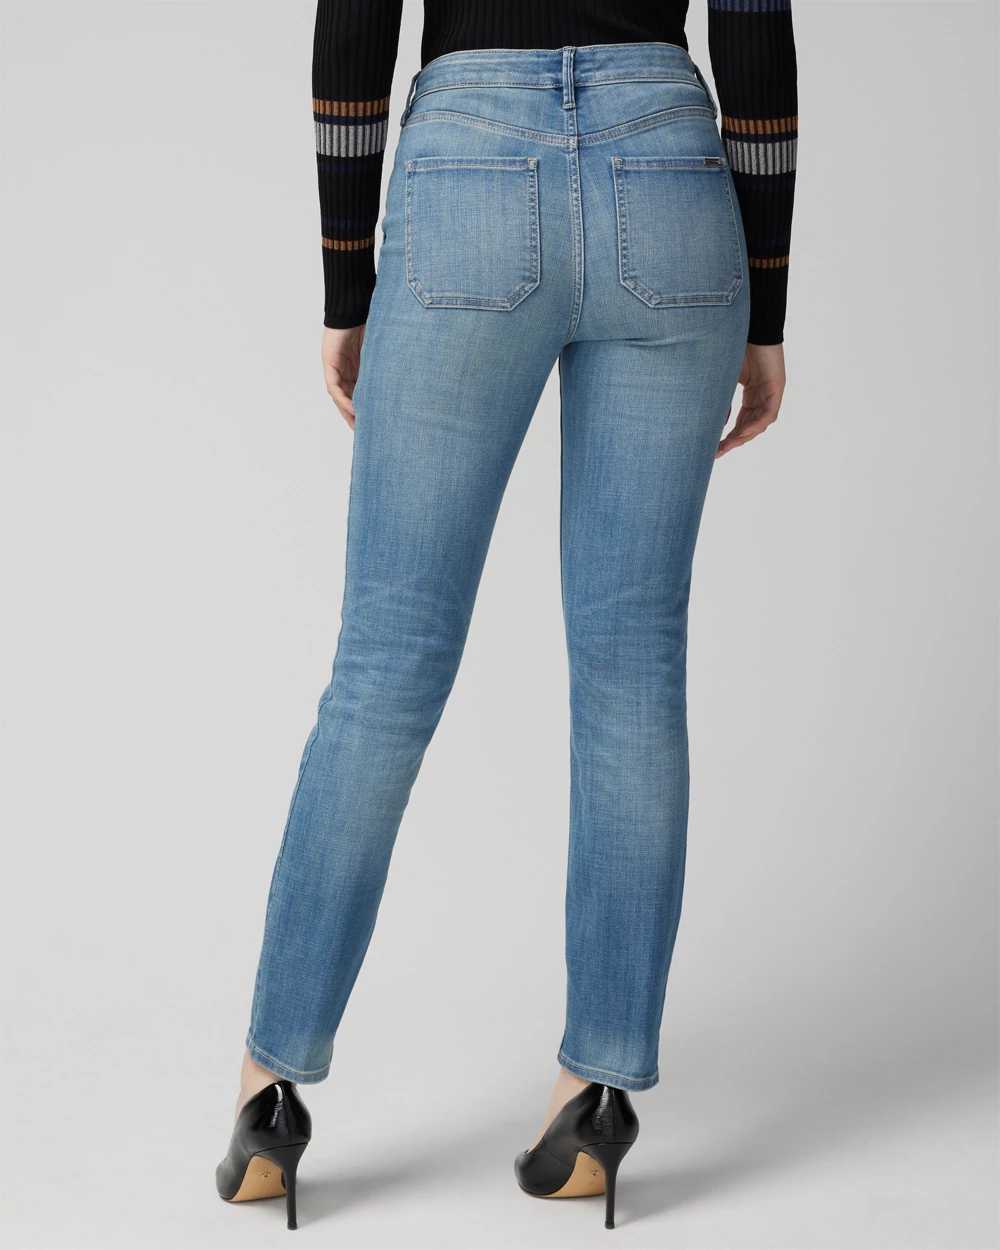 High-Rise Every Day Soft Turnlock Pocket Slim Jeans click to view larger image.